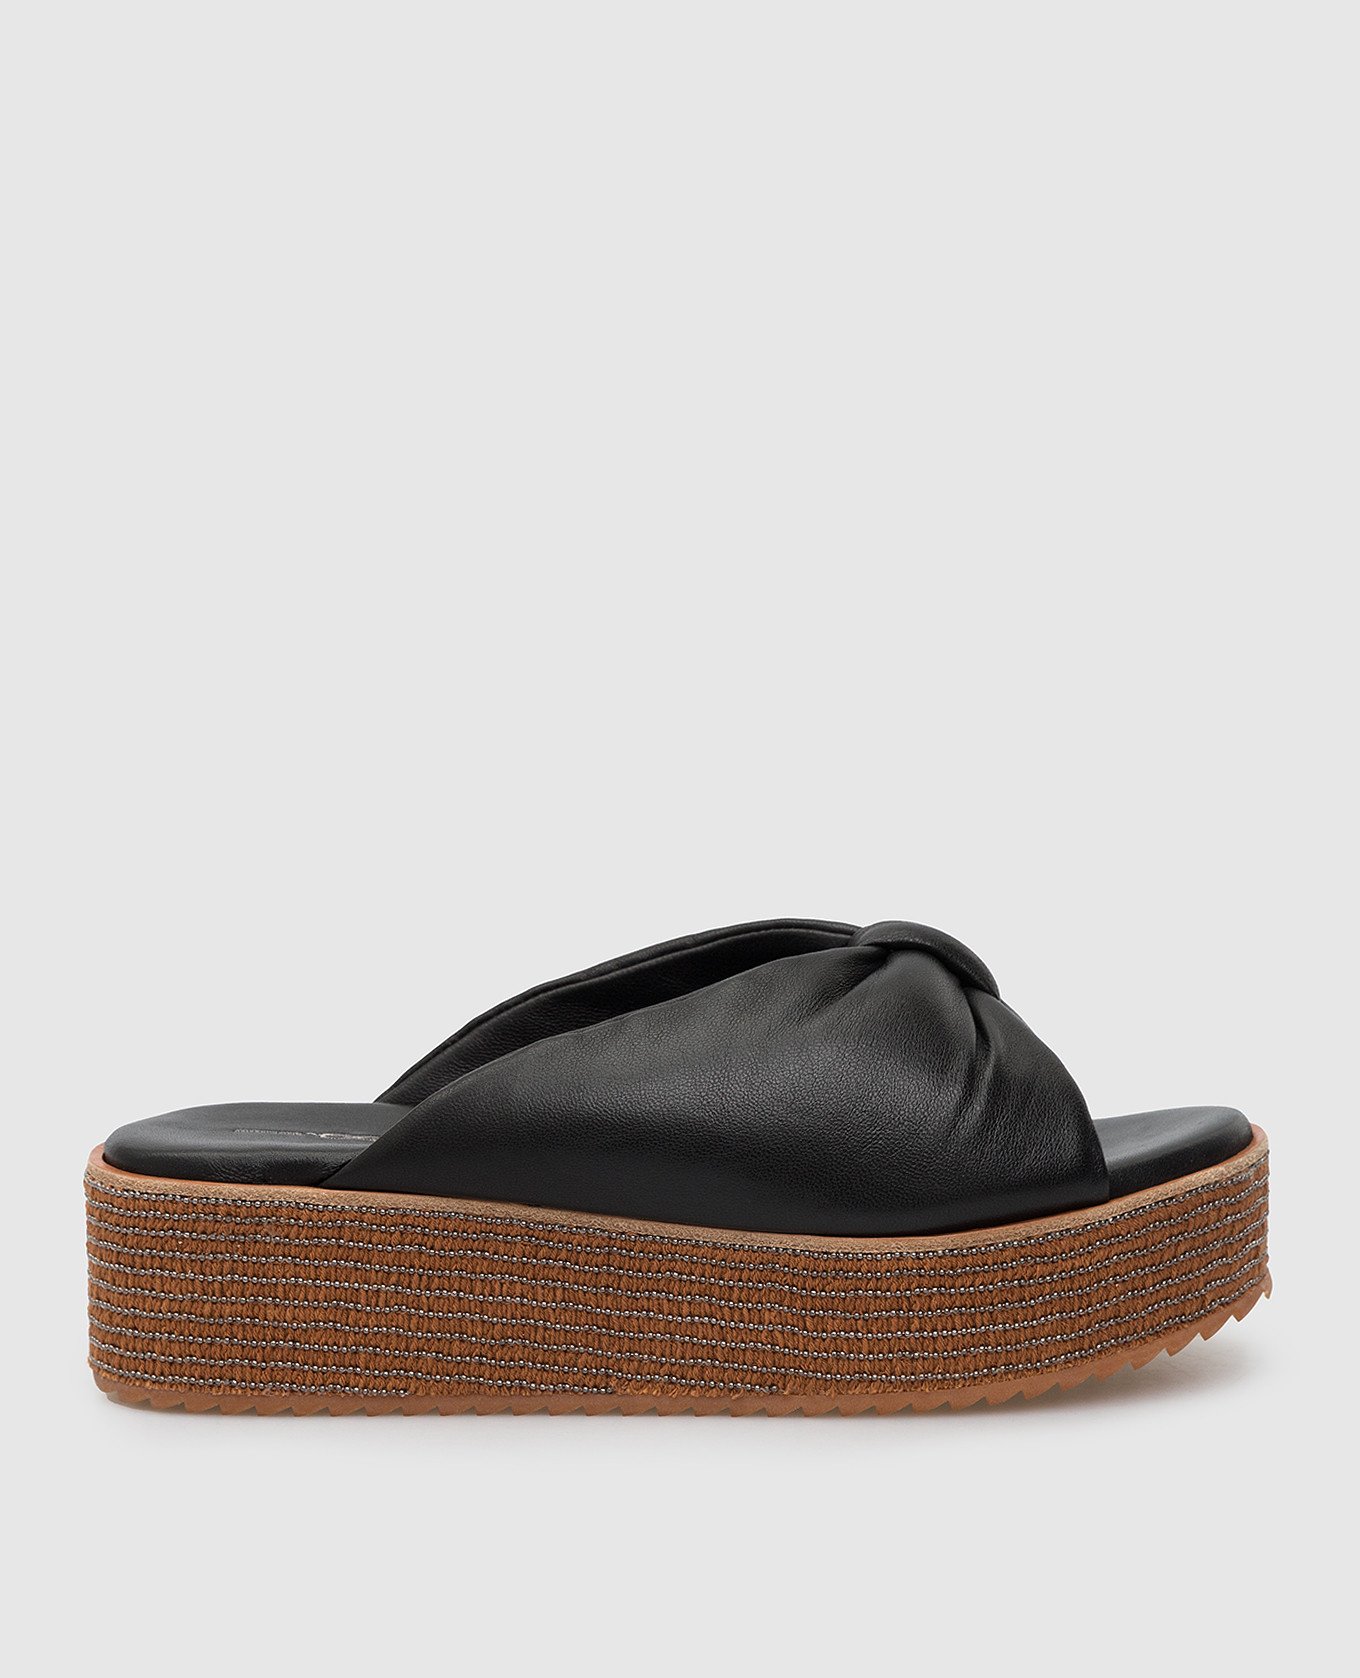 Black leather slippers with monili